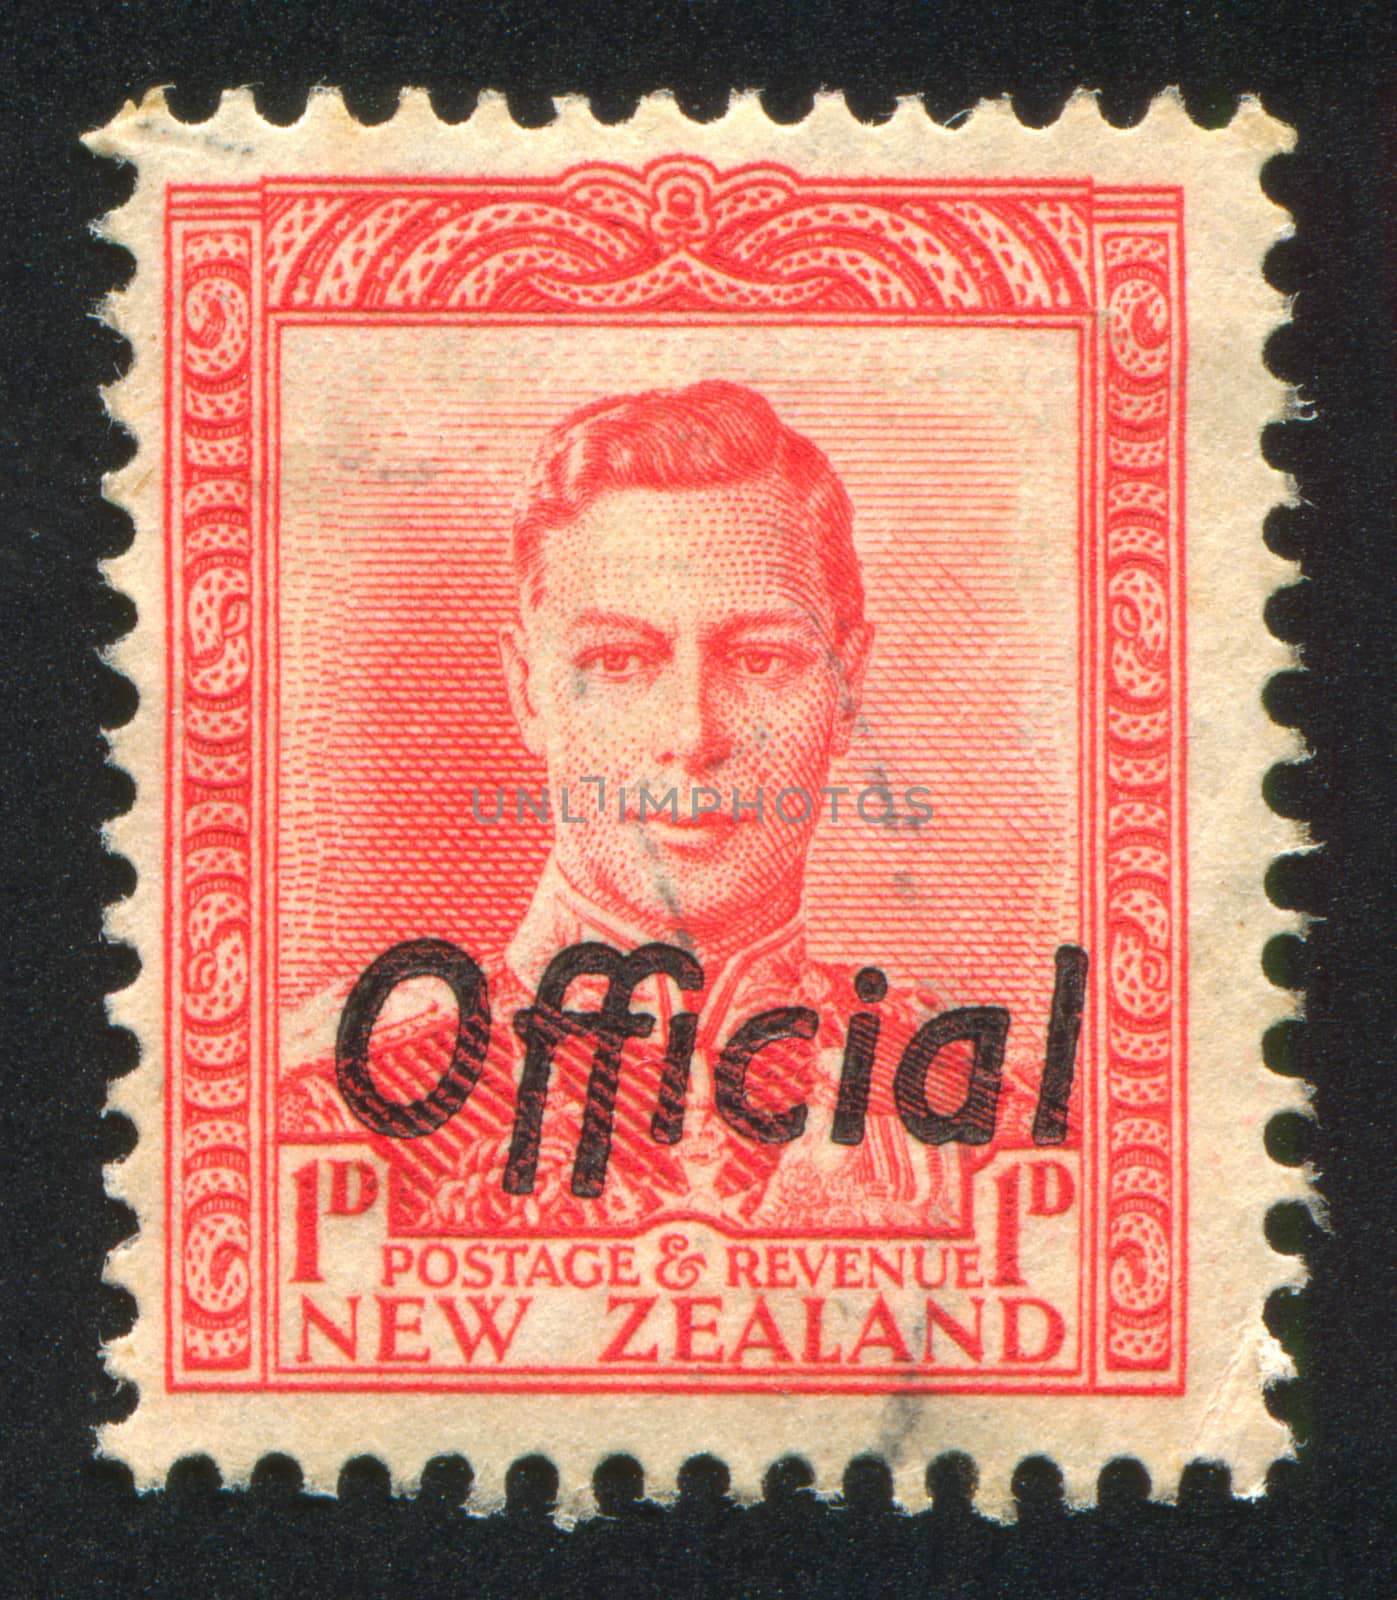 King George VI by rook